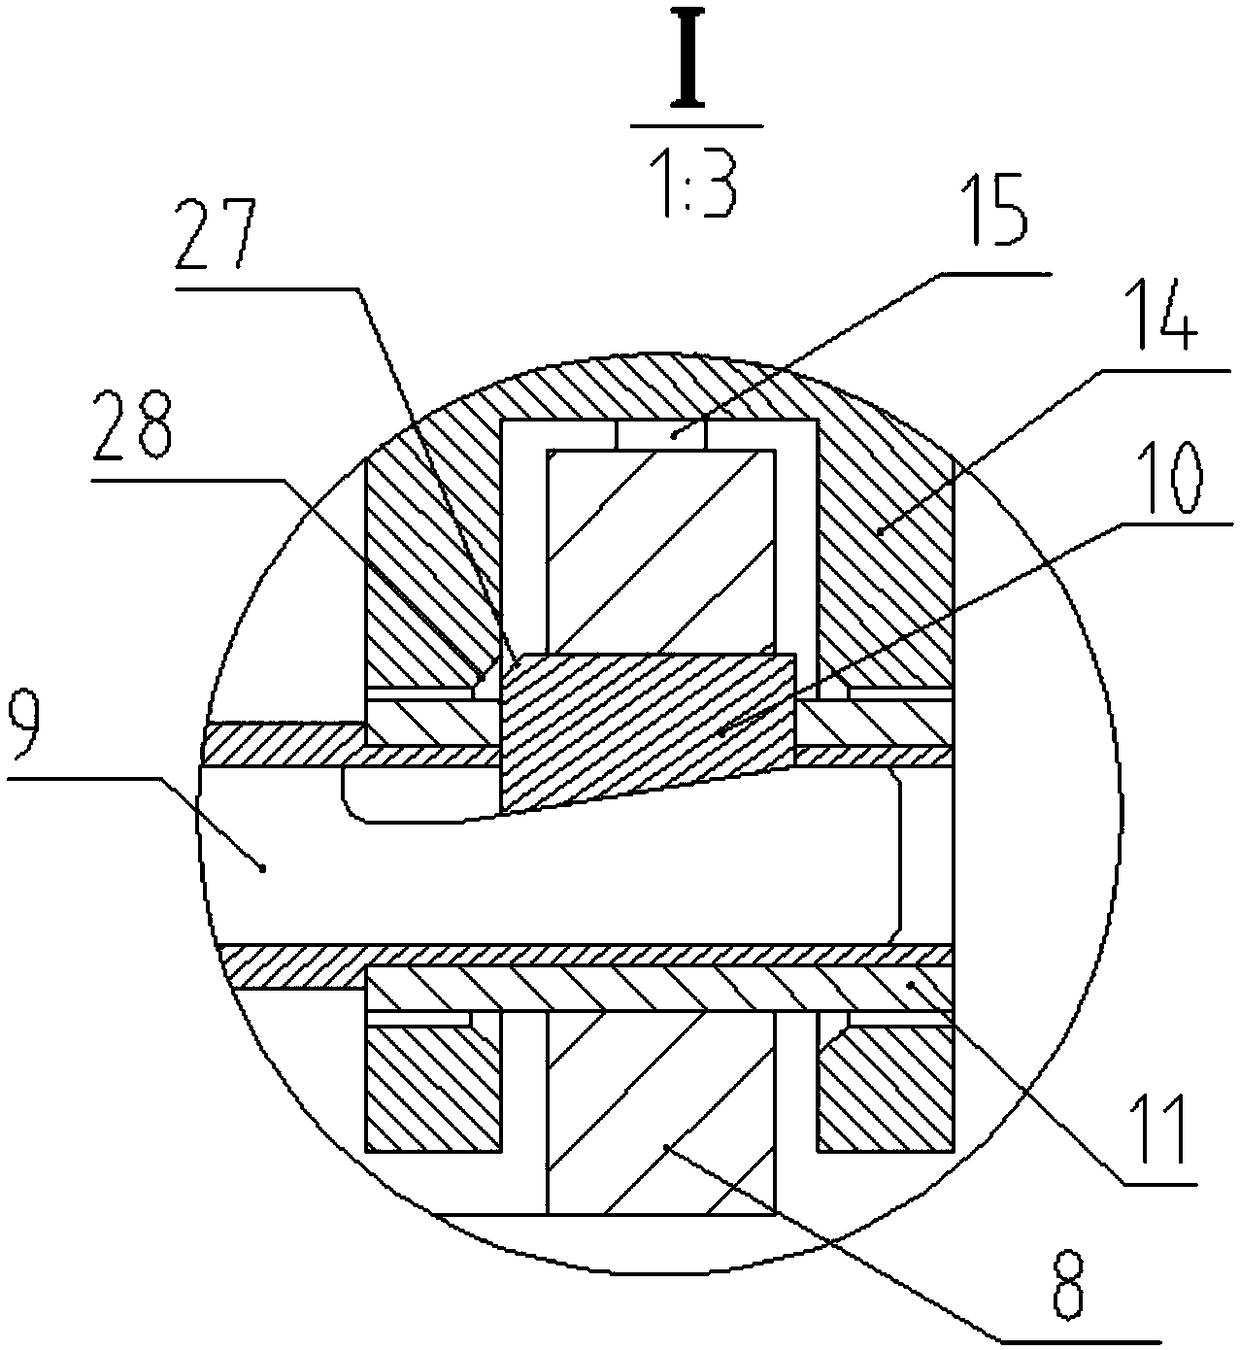 Cracking processing device for crankcase bearing seat